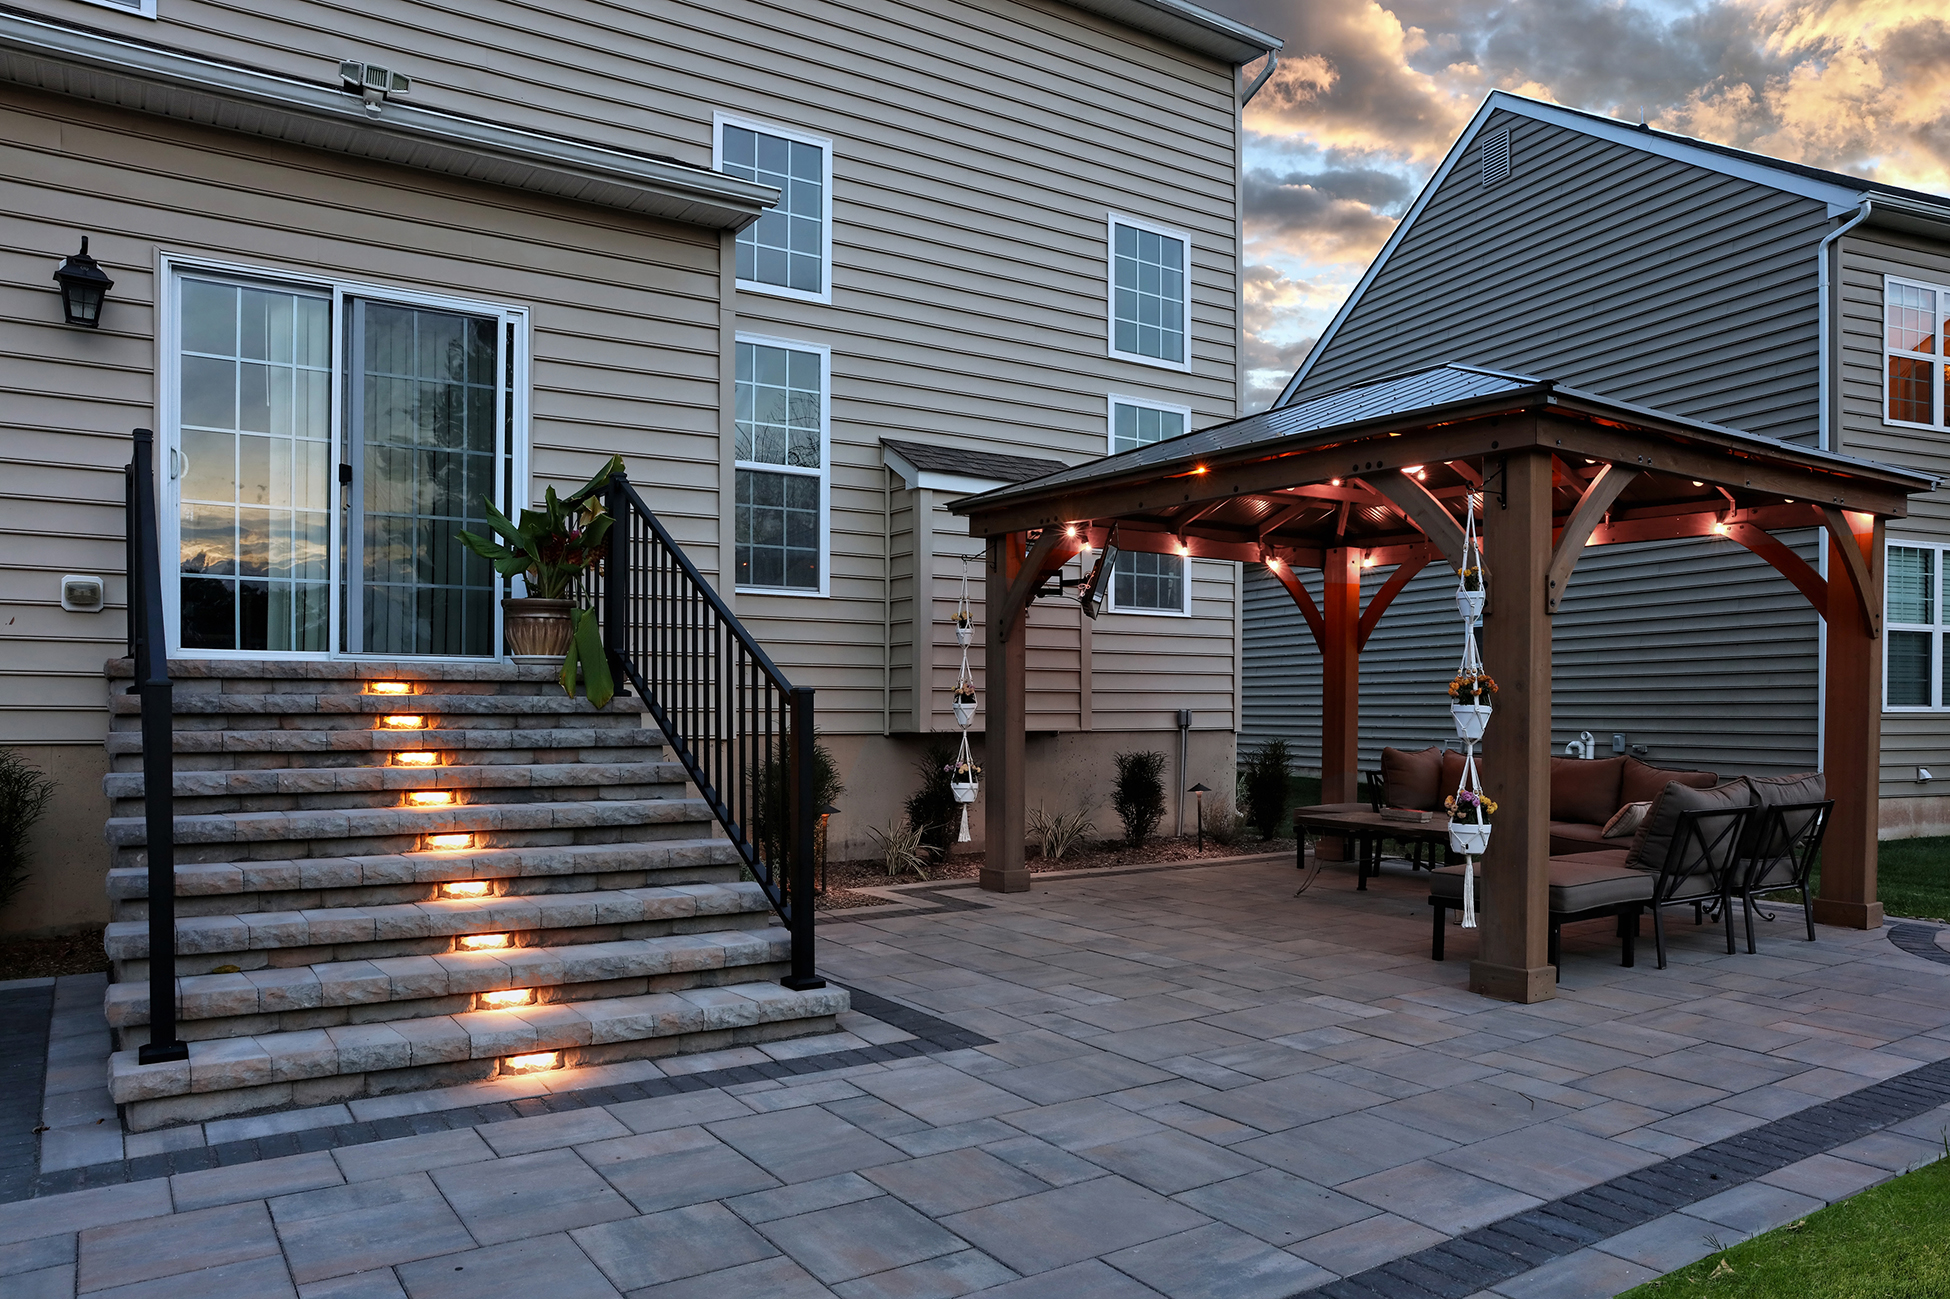 Pavers, Steps, Lighting and Outdoor Living Area